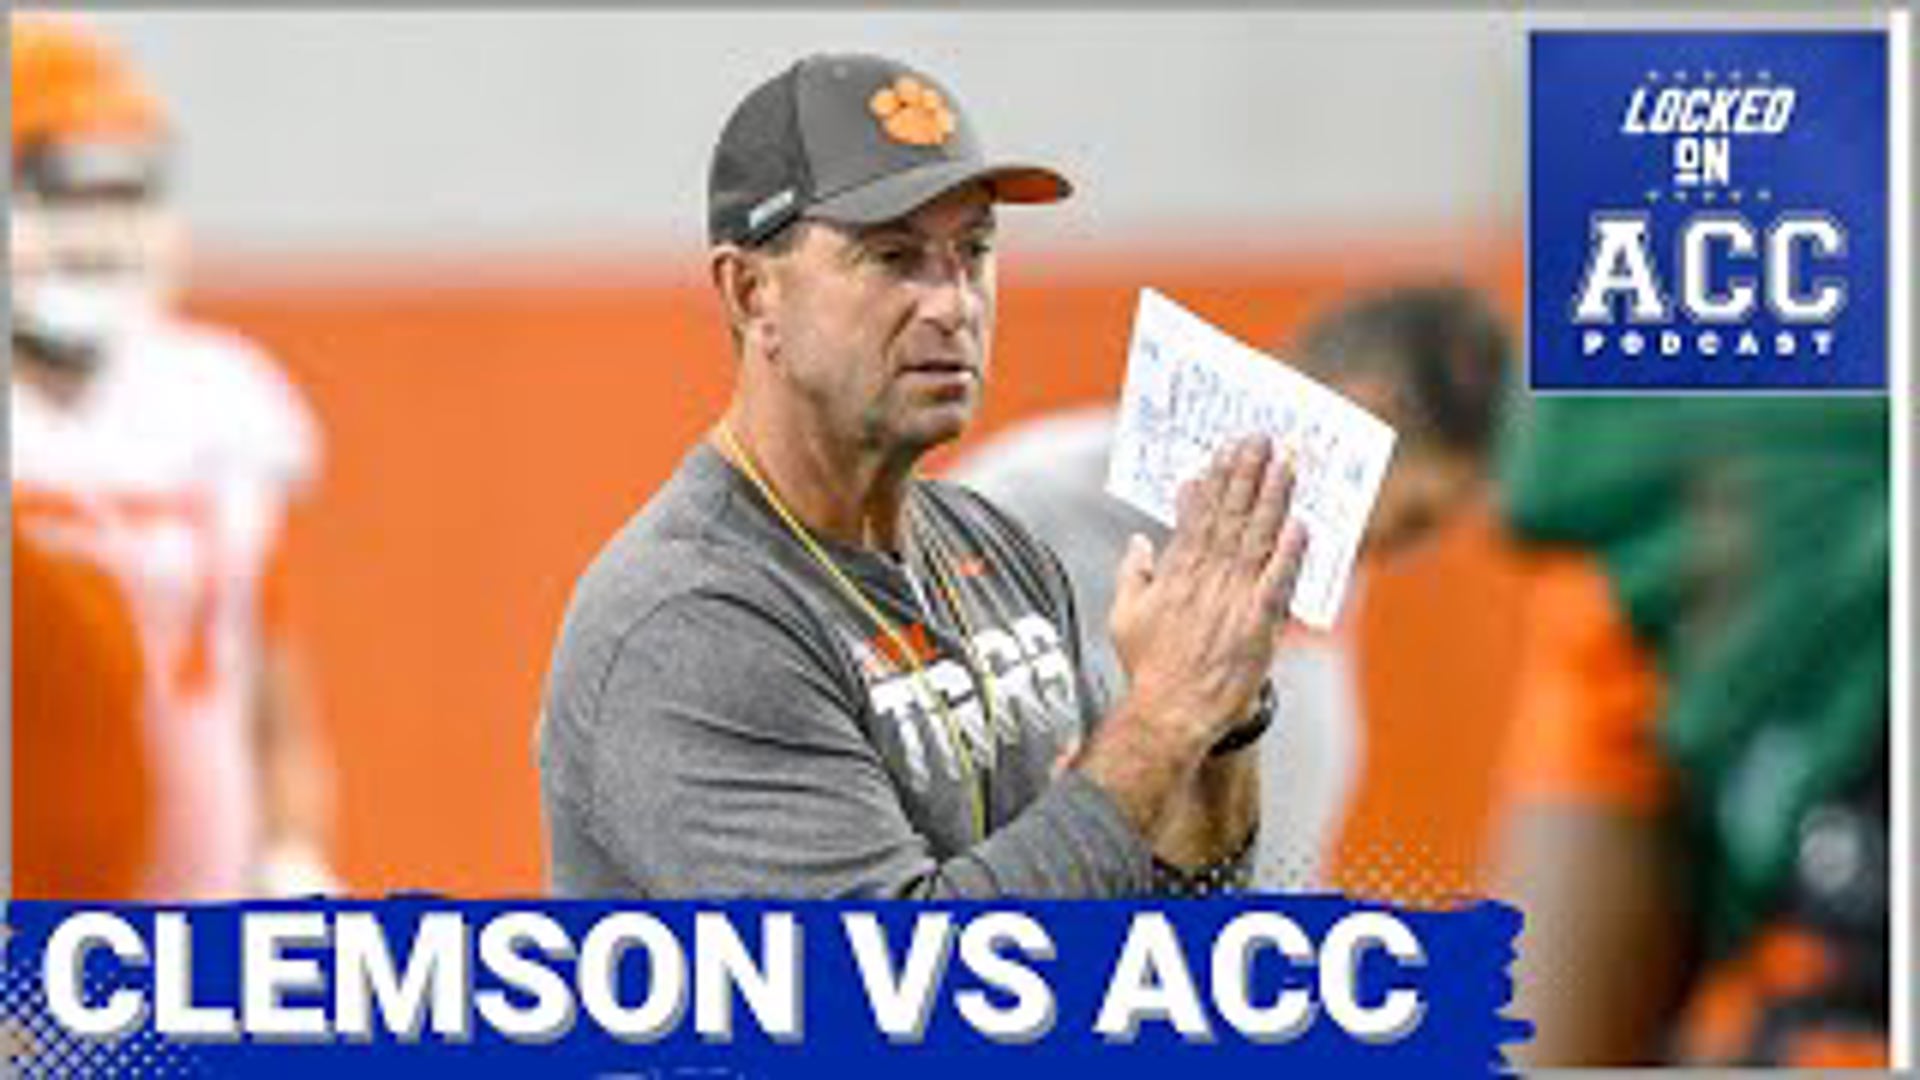 The Clemson Tigers took a hard shot at the ACC in their amended complaint. Clemson is suing the conference and is now seeking unspecified damages.